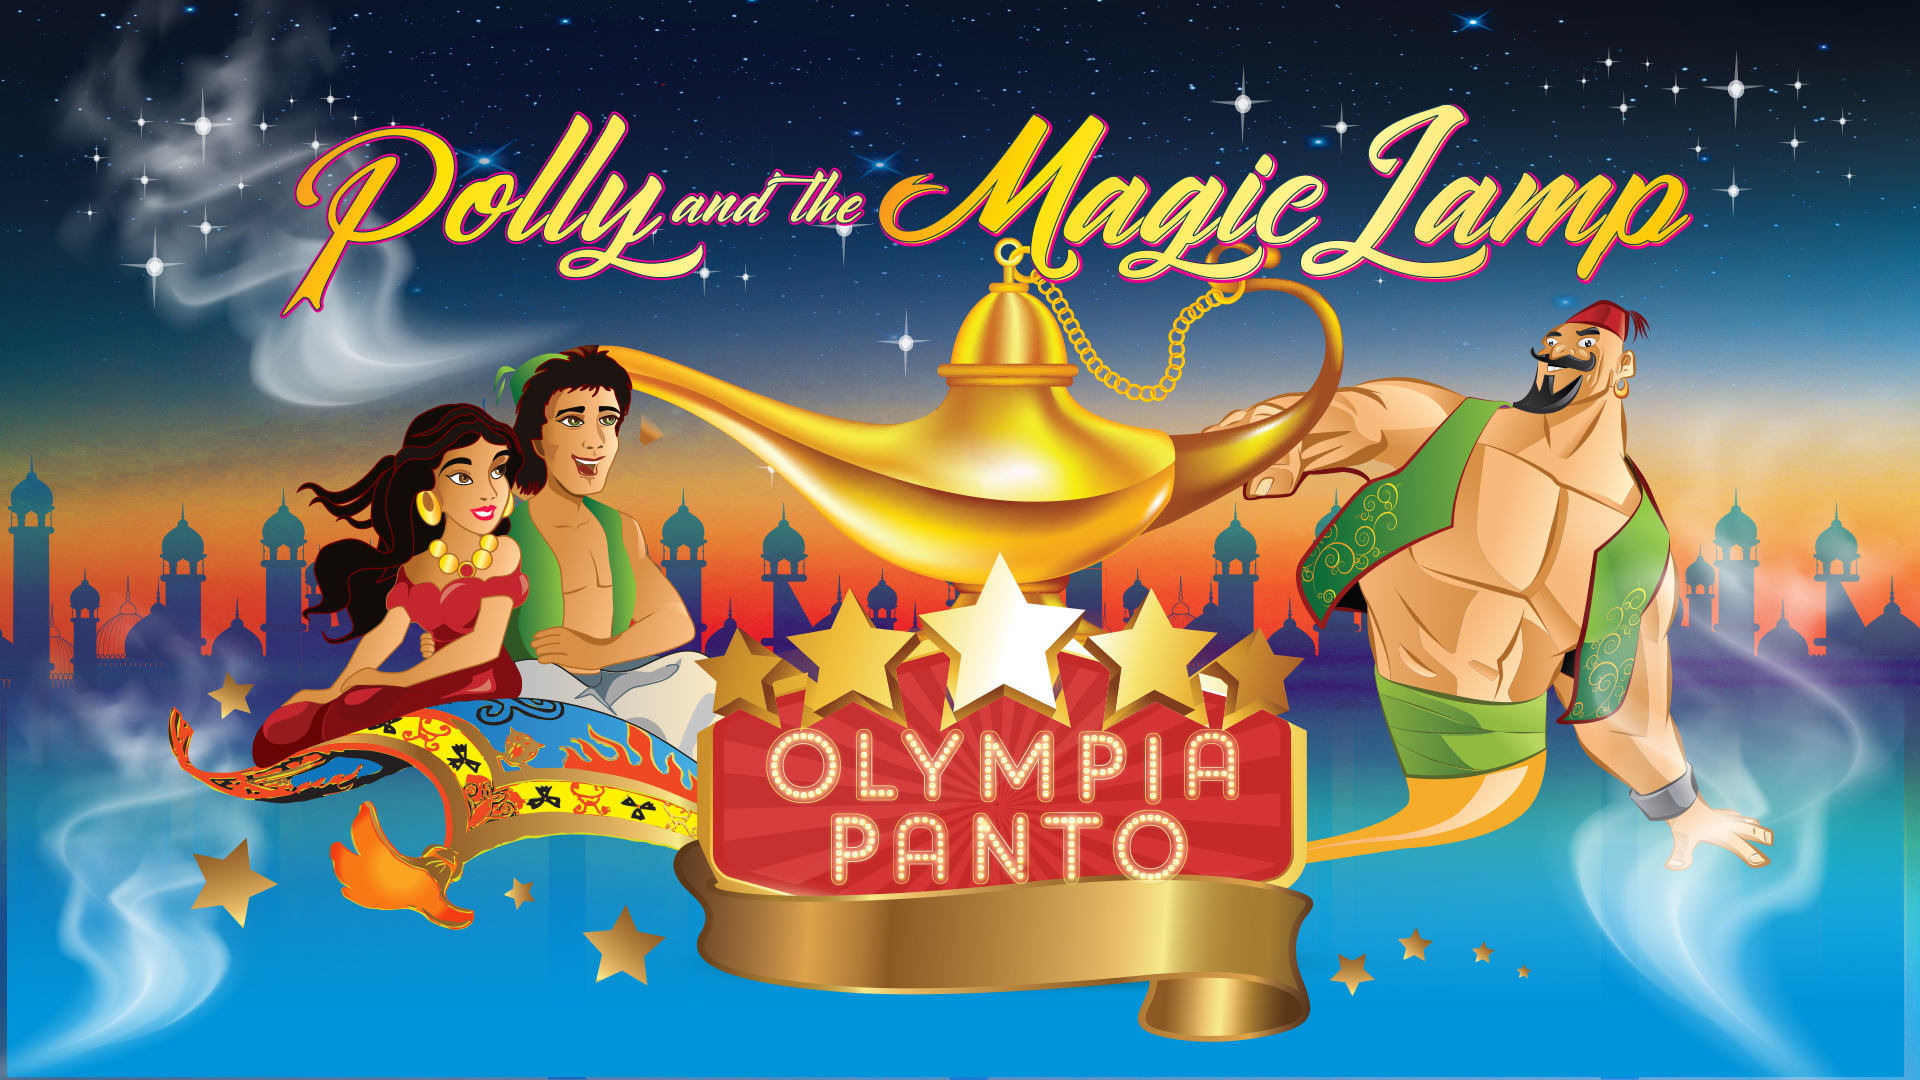 Olympia Christmas Panto Just Announced!